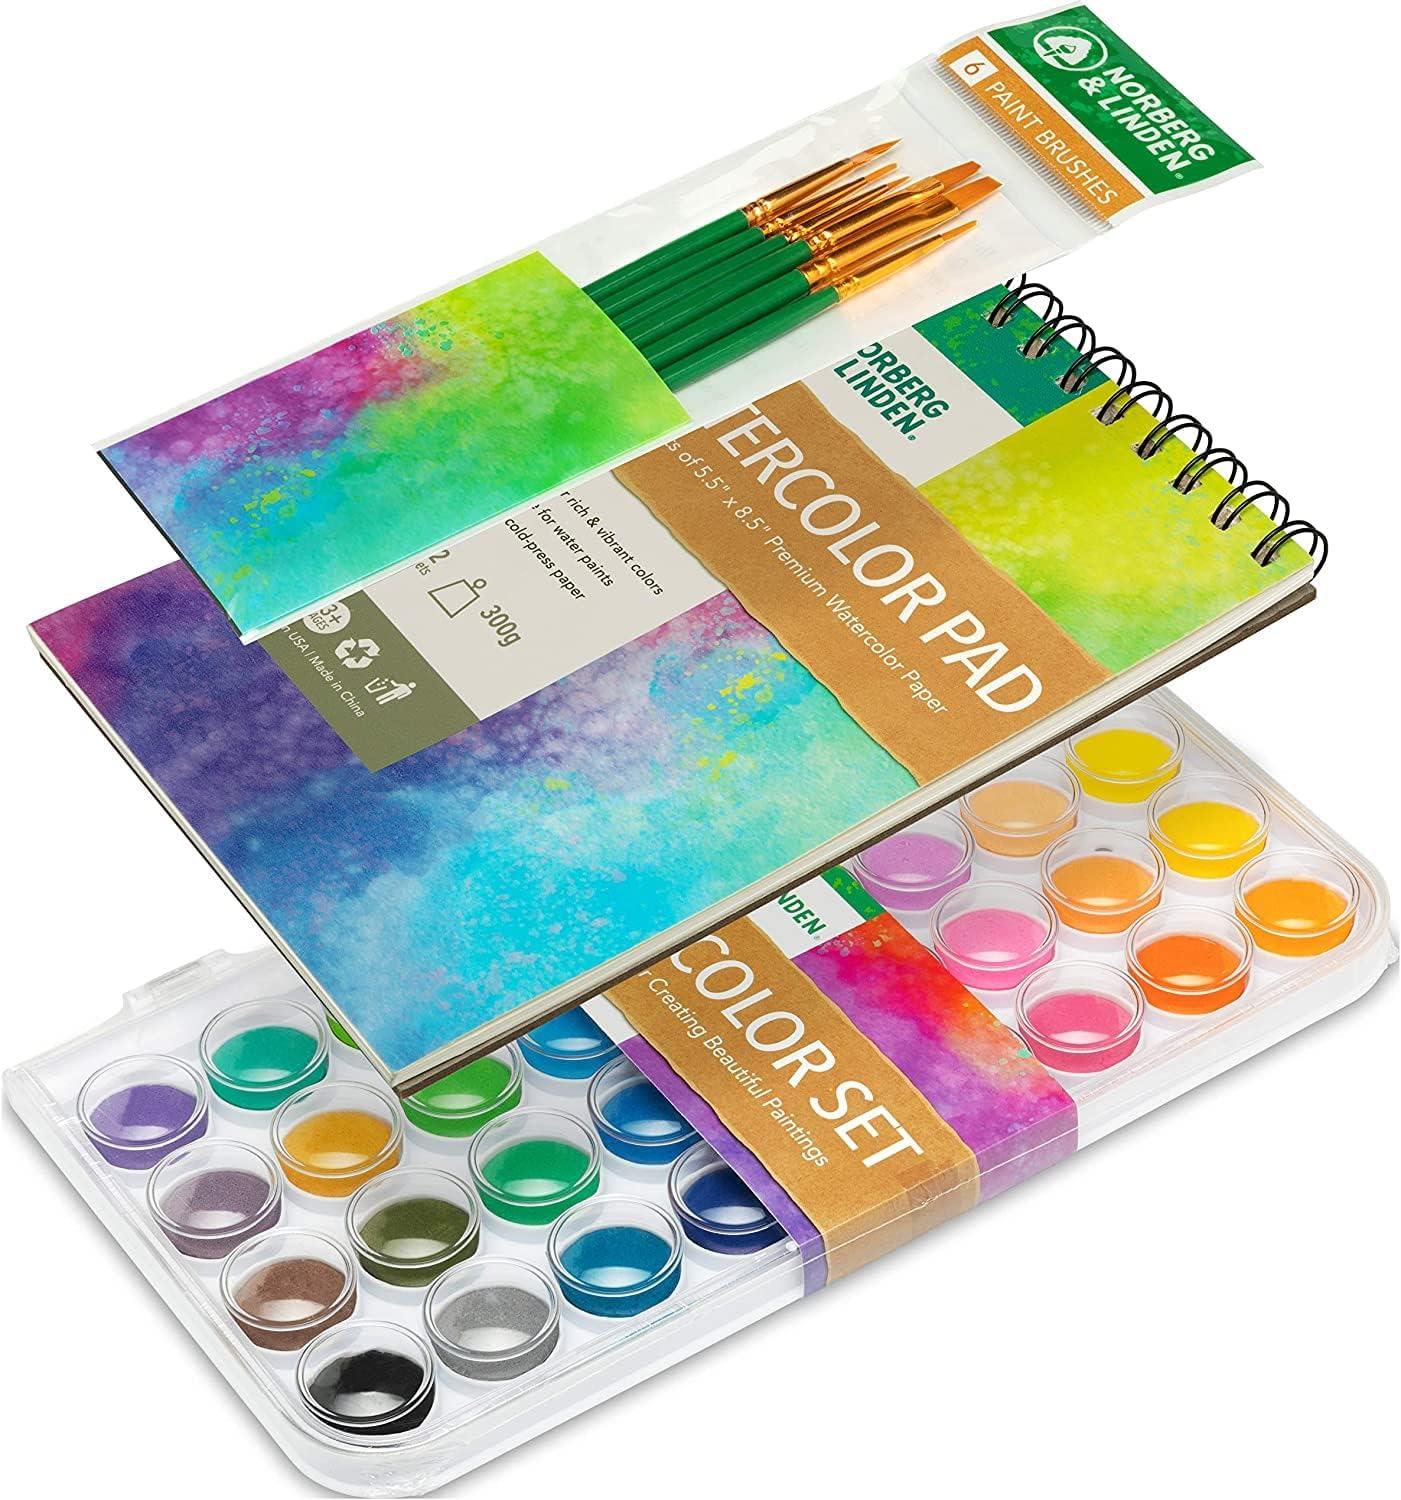 Norberg & Linden Acrylic Paint Set - Canvas and Acrylic Paint Sets for  Adults, Teens, Kids - Arts Crafts Painting Kit with Supplies - Includes 12